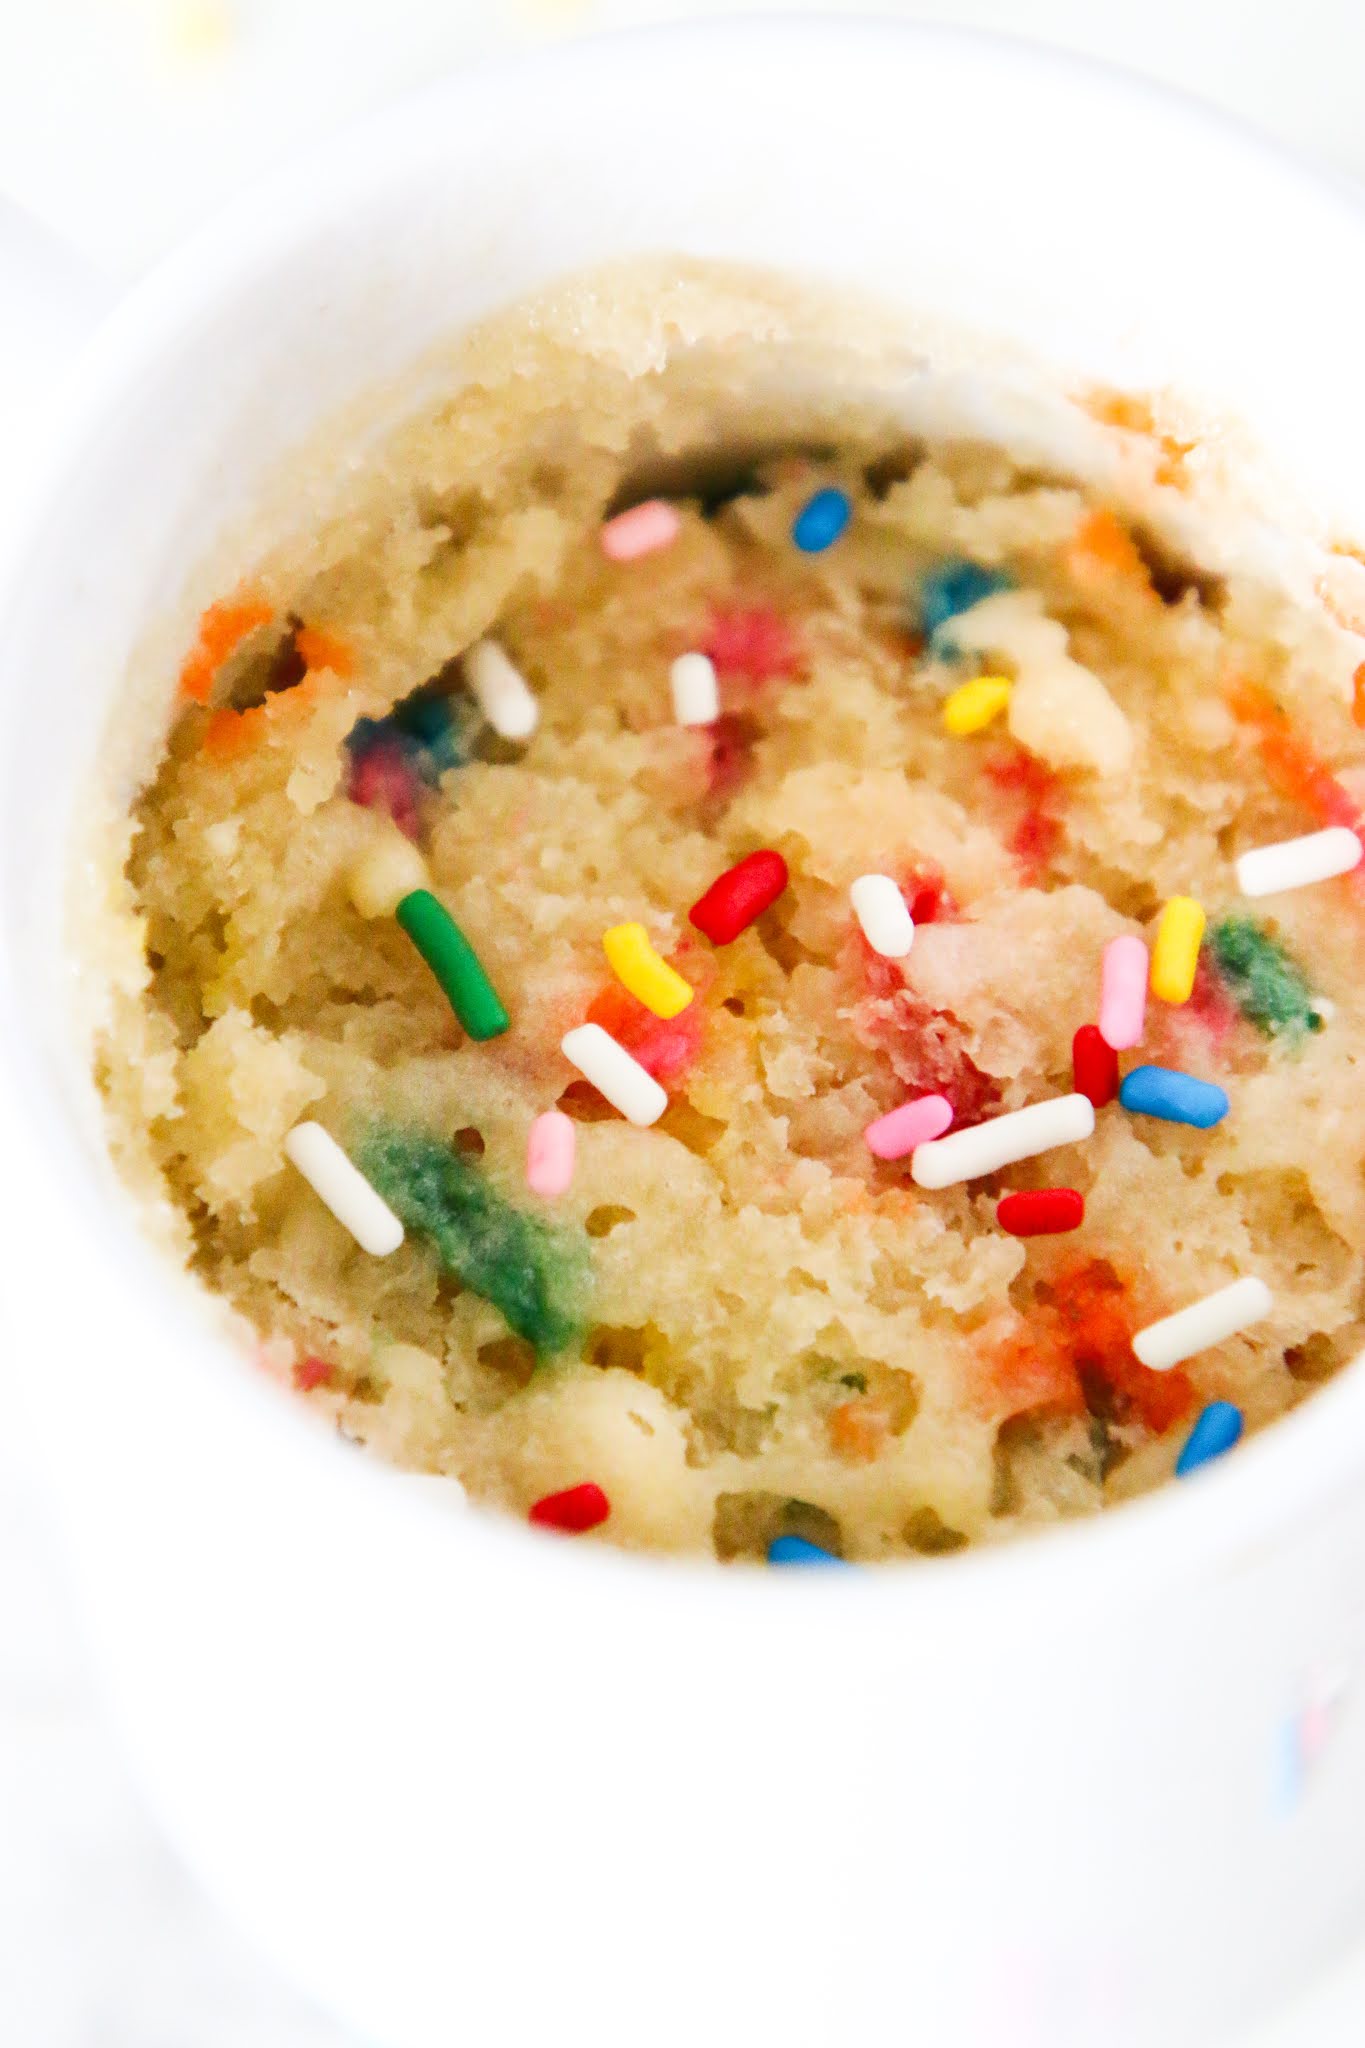 confetti cake in a mug with a fork and rainbow sprinkles